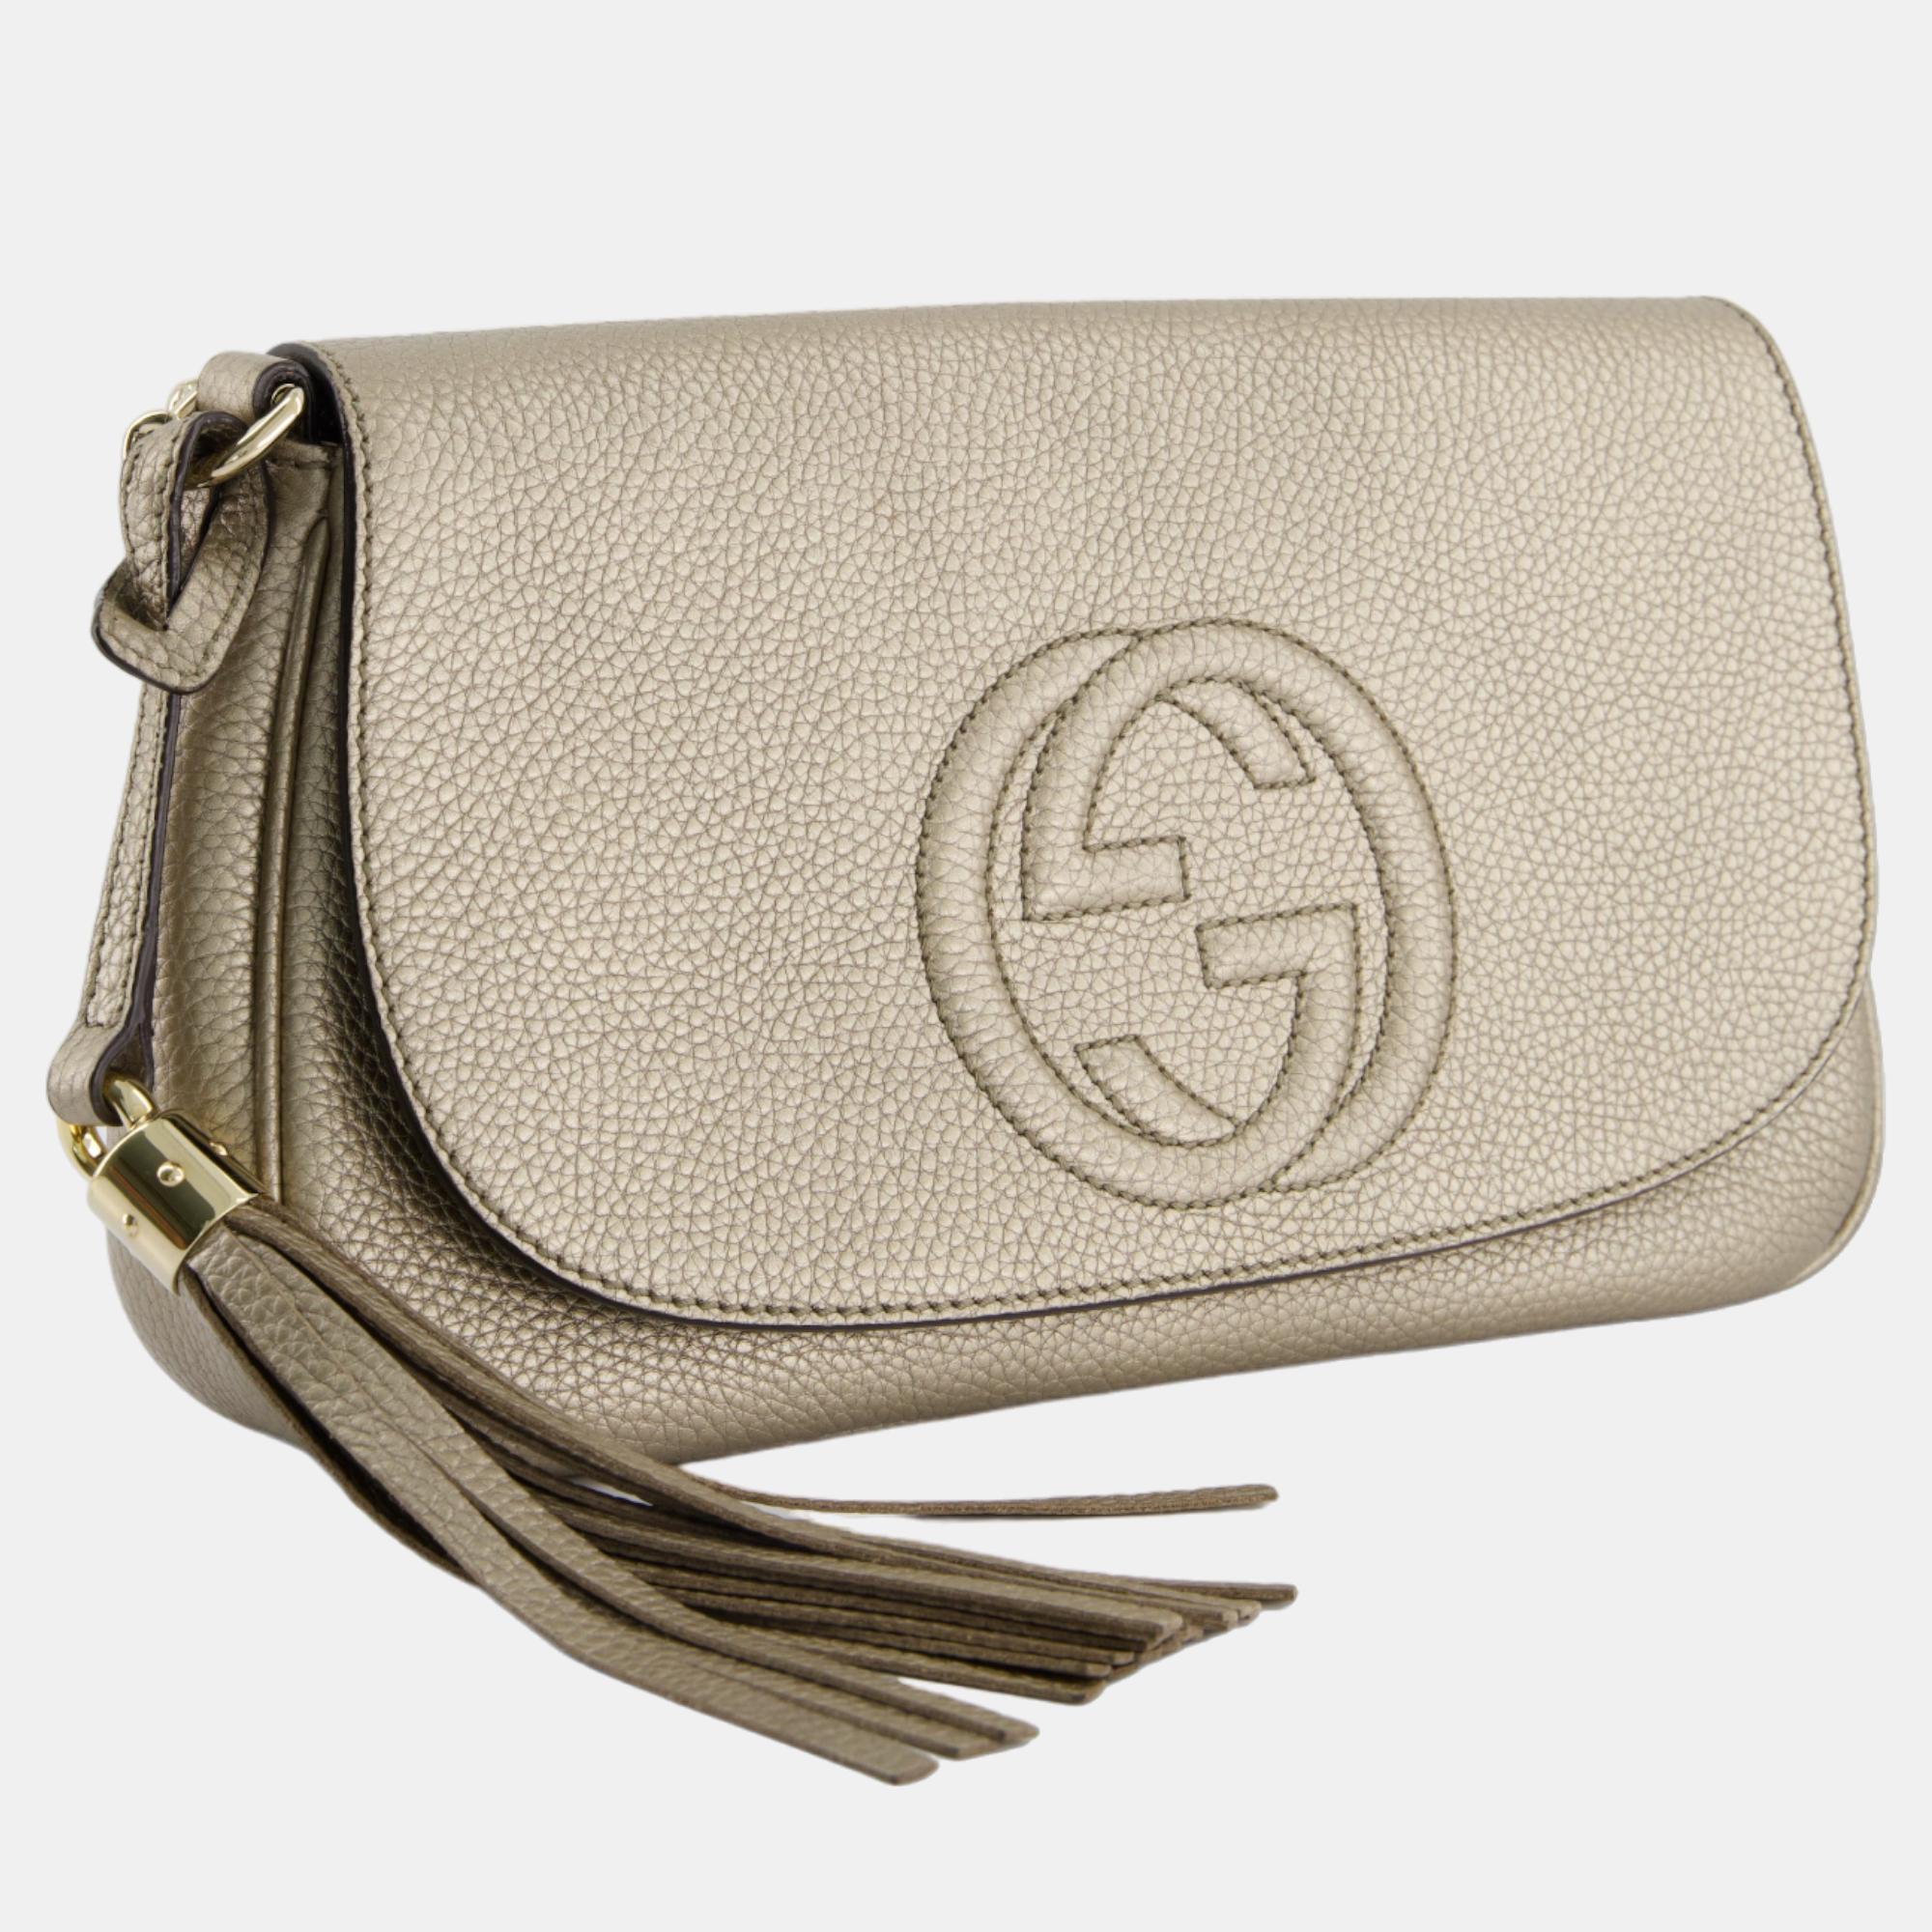 

Gucci Gold Soho Flap Bag in Grained Calfskin Leather with Gold Hardware